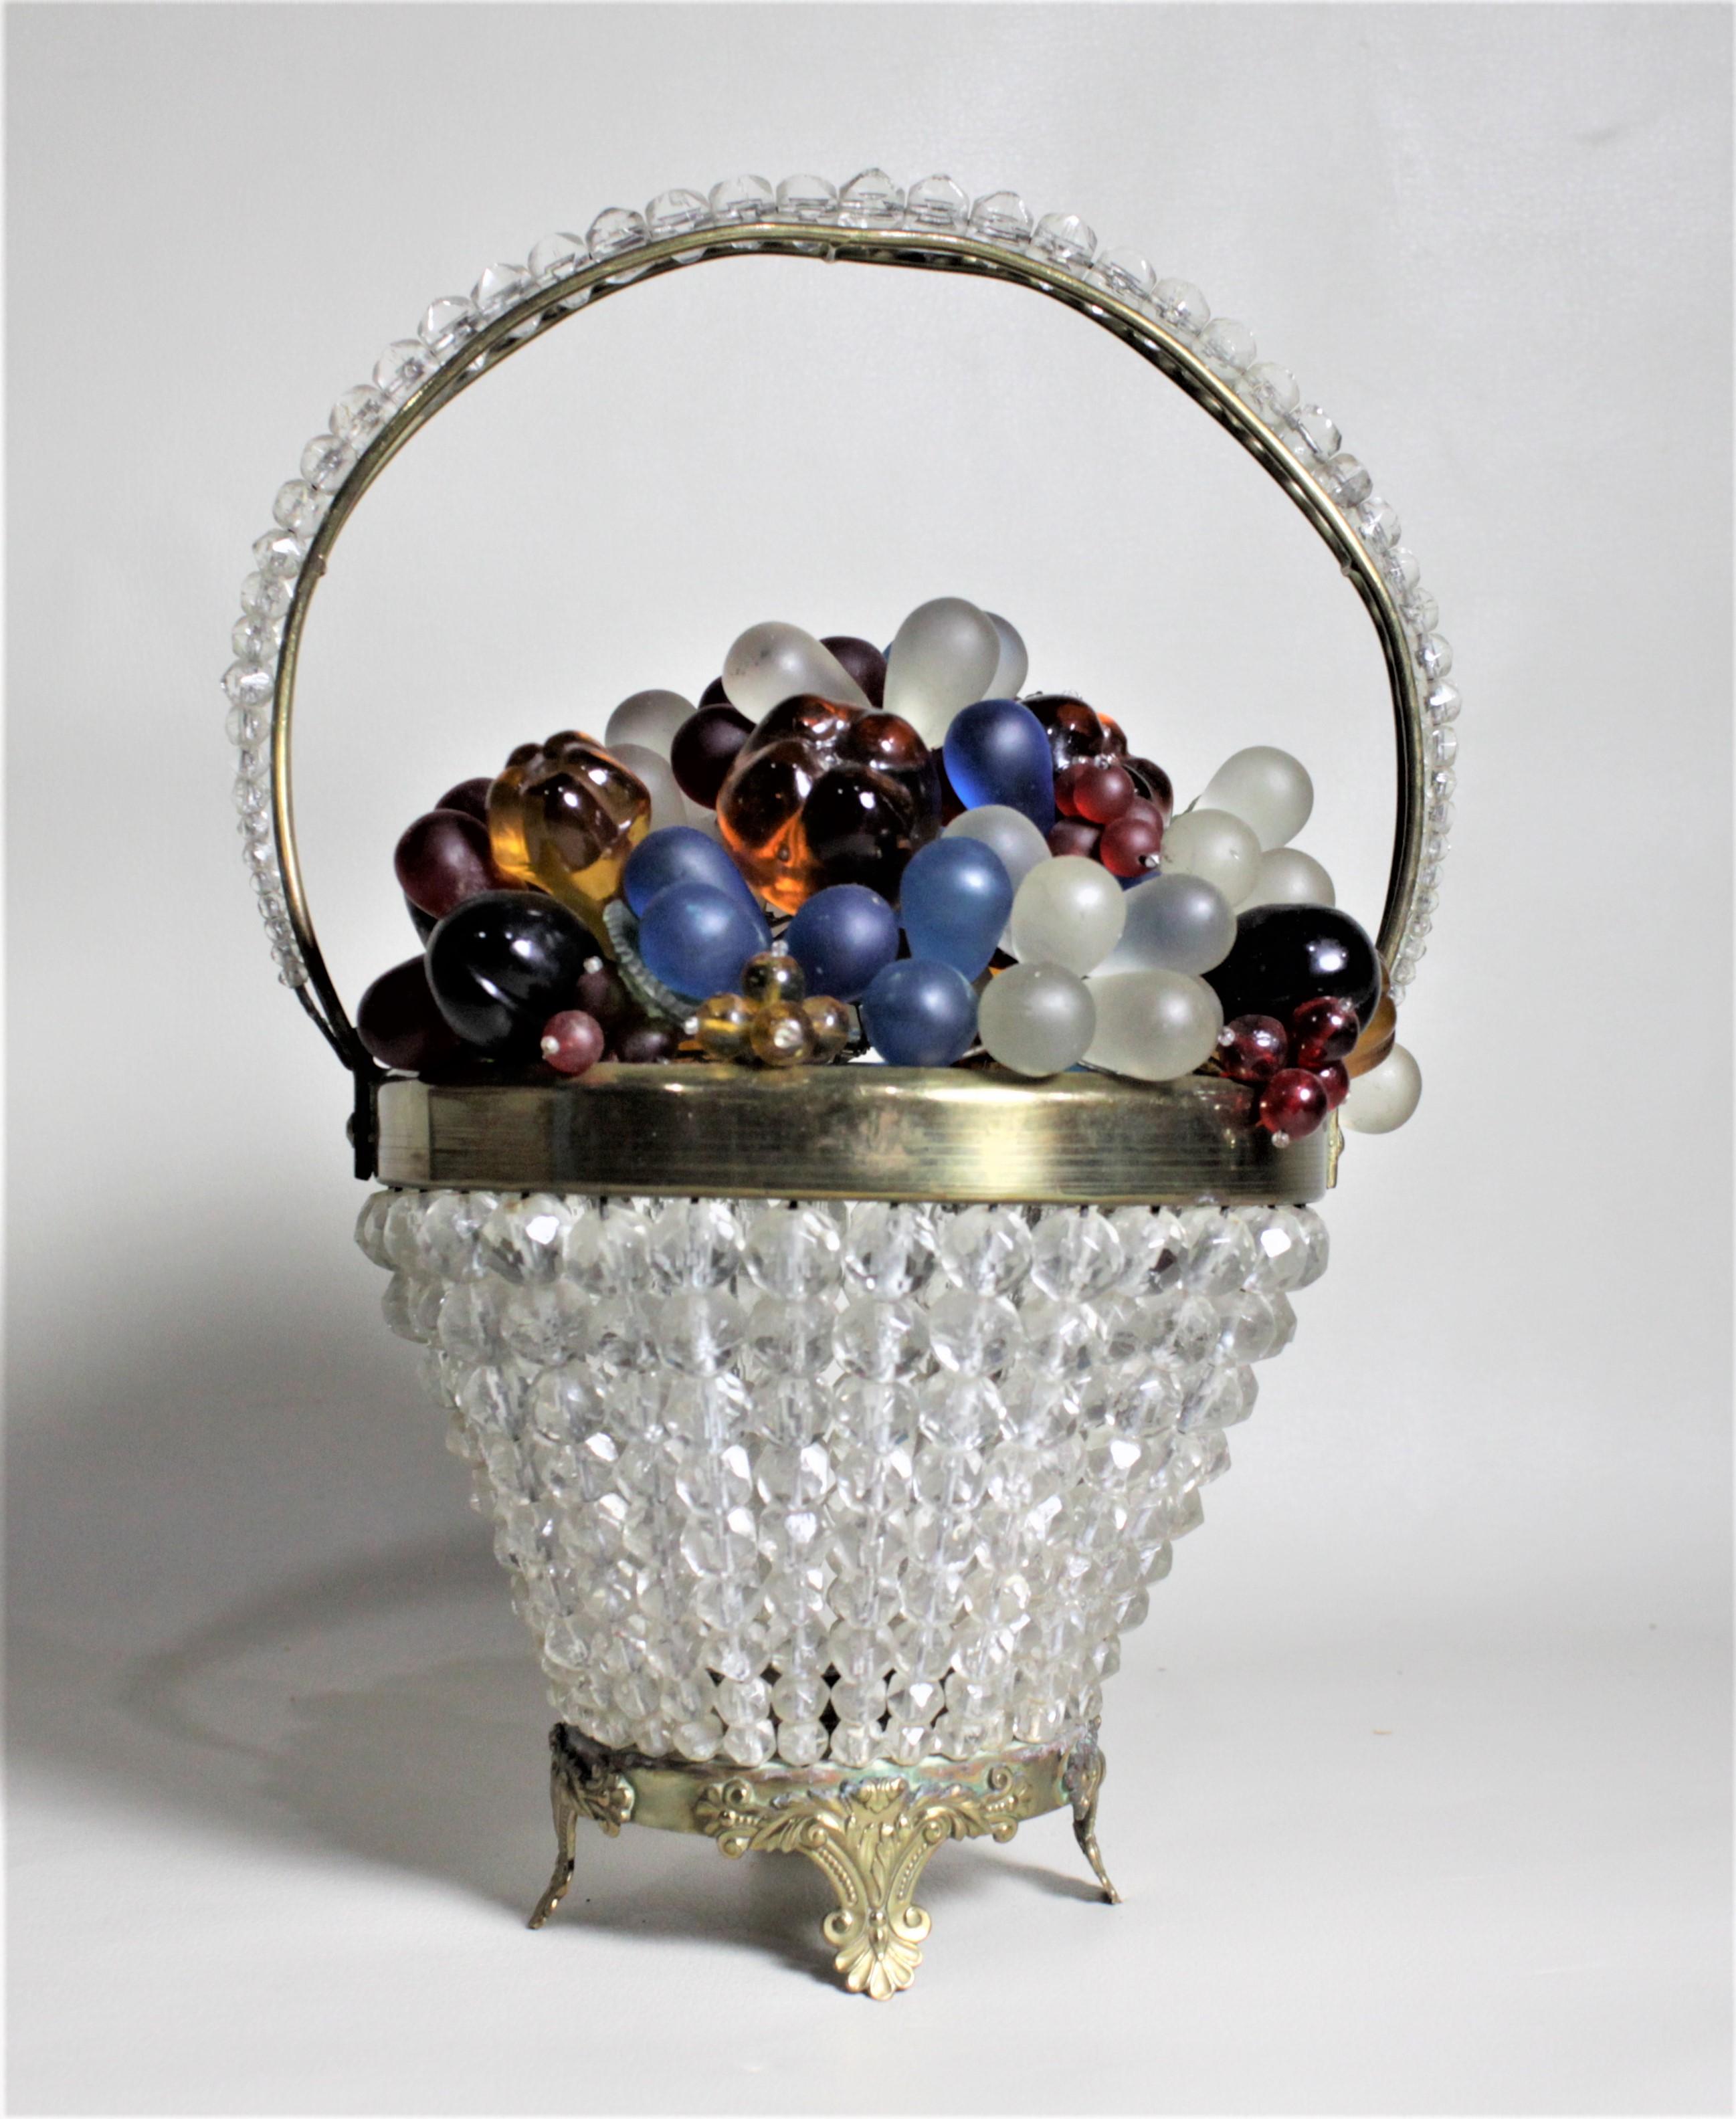 This figural art glass fruit and flower basket was produced in Czechoslovakia in the mid-late 1930s in the period Art Deco style. The base is composed of a series of faceted clear beads making up the exterior of the basket, and accenting handle. The